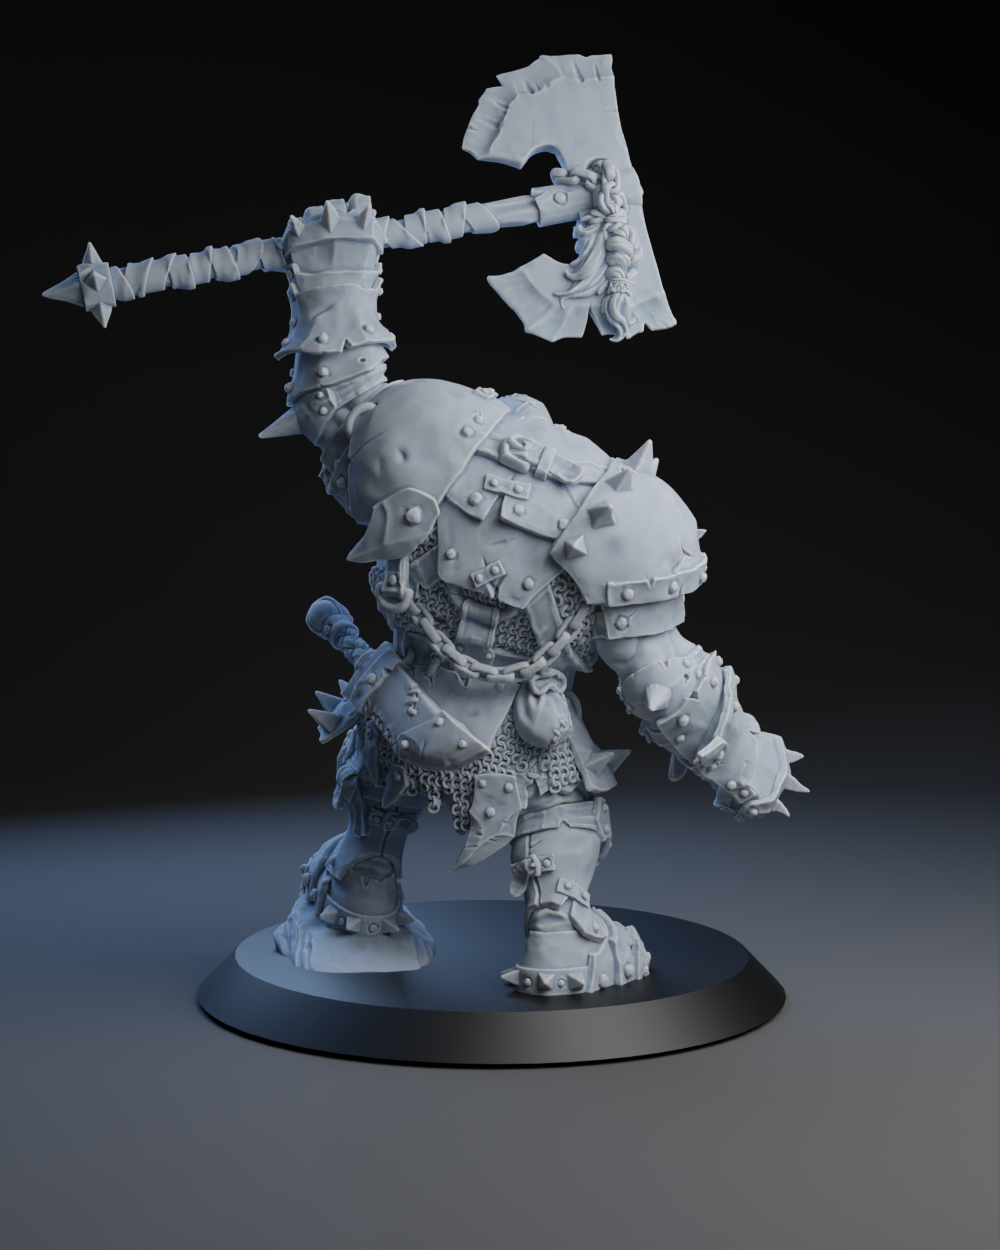 28mm Orc Warlord